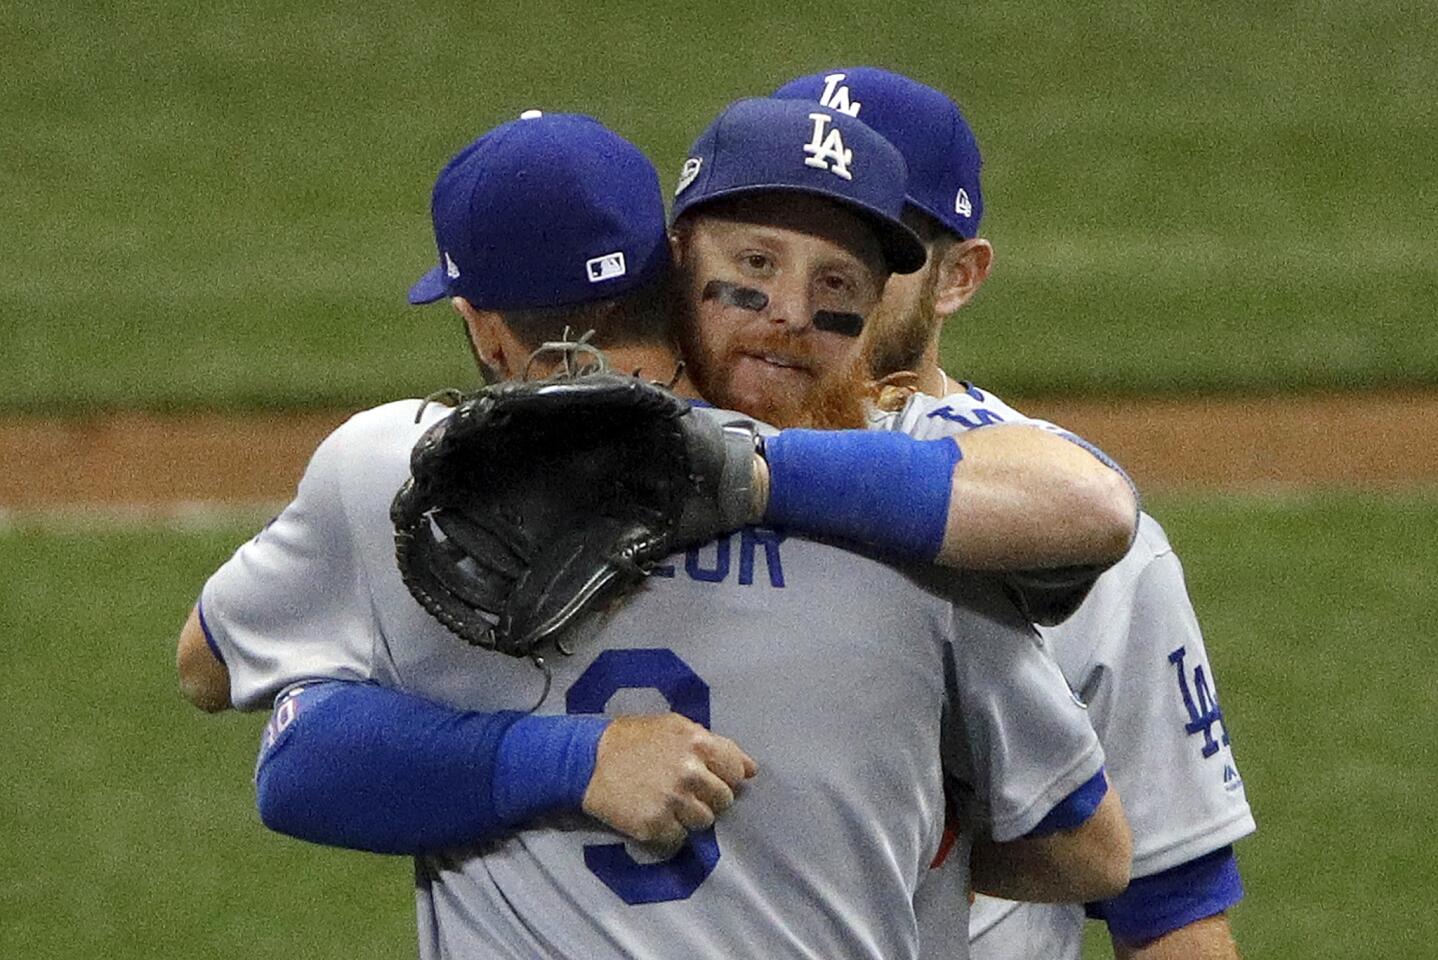 Los Angeles Dodgers' Justin Turner hugs Chris Taylor (3) after Game 2 of the National League Championship Series baseball game against the Milwaukee Brewers Saturday, Oct. 13, 2018, in Milwaukee. The Dodgers won 4-3. (AP Photo/Charlie Riedel)